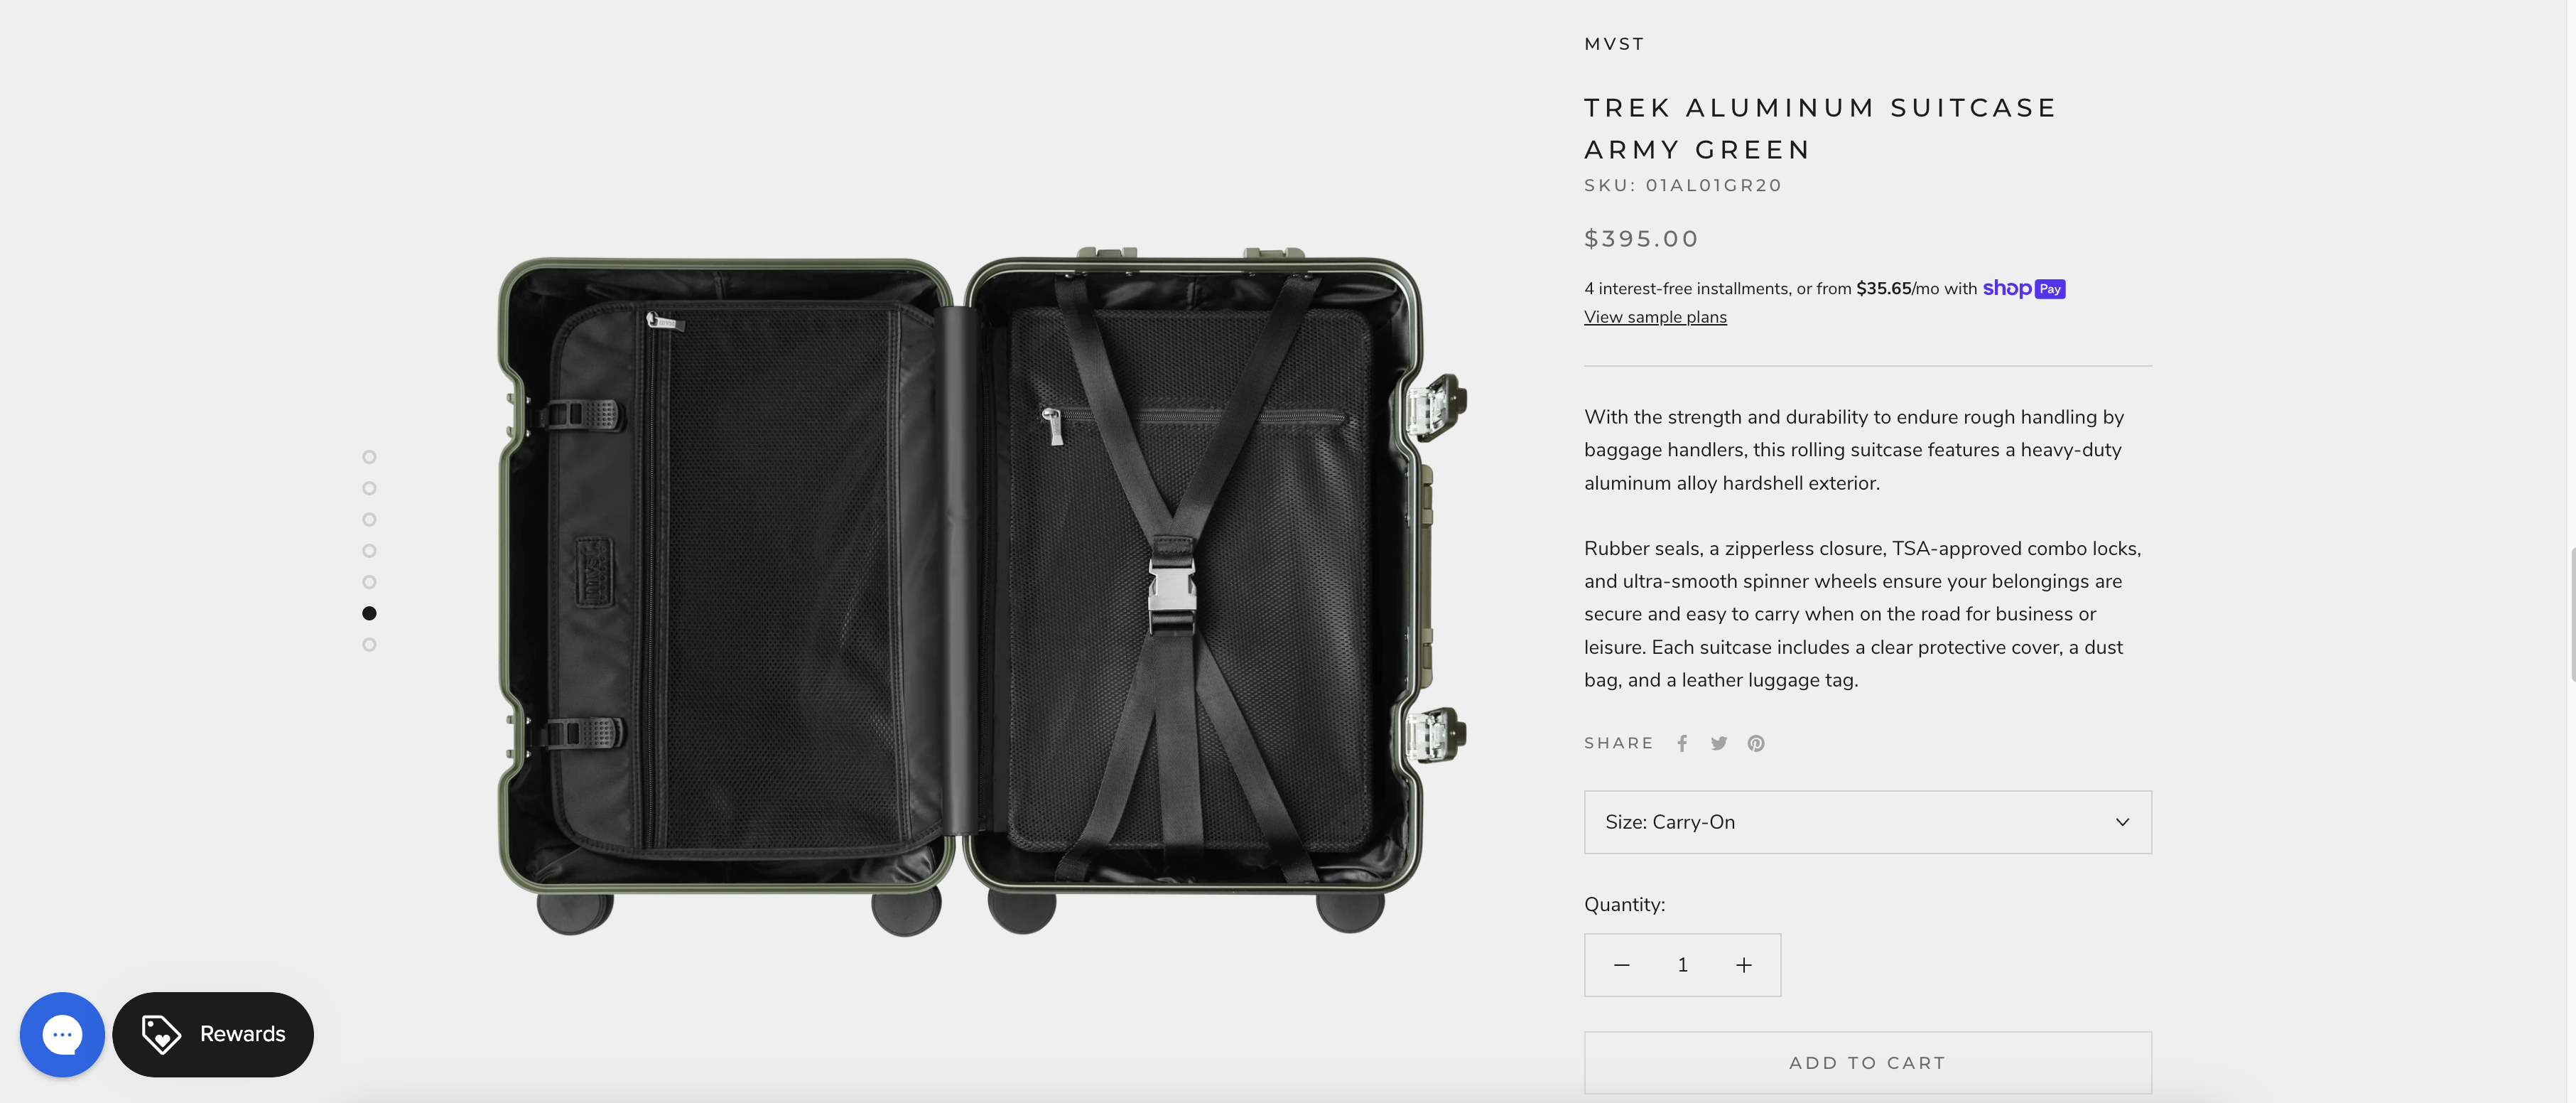 The savings from riding my bike just allowed me to buy an expensive suitcase while still having money in reserve. 